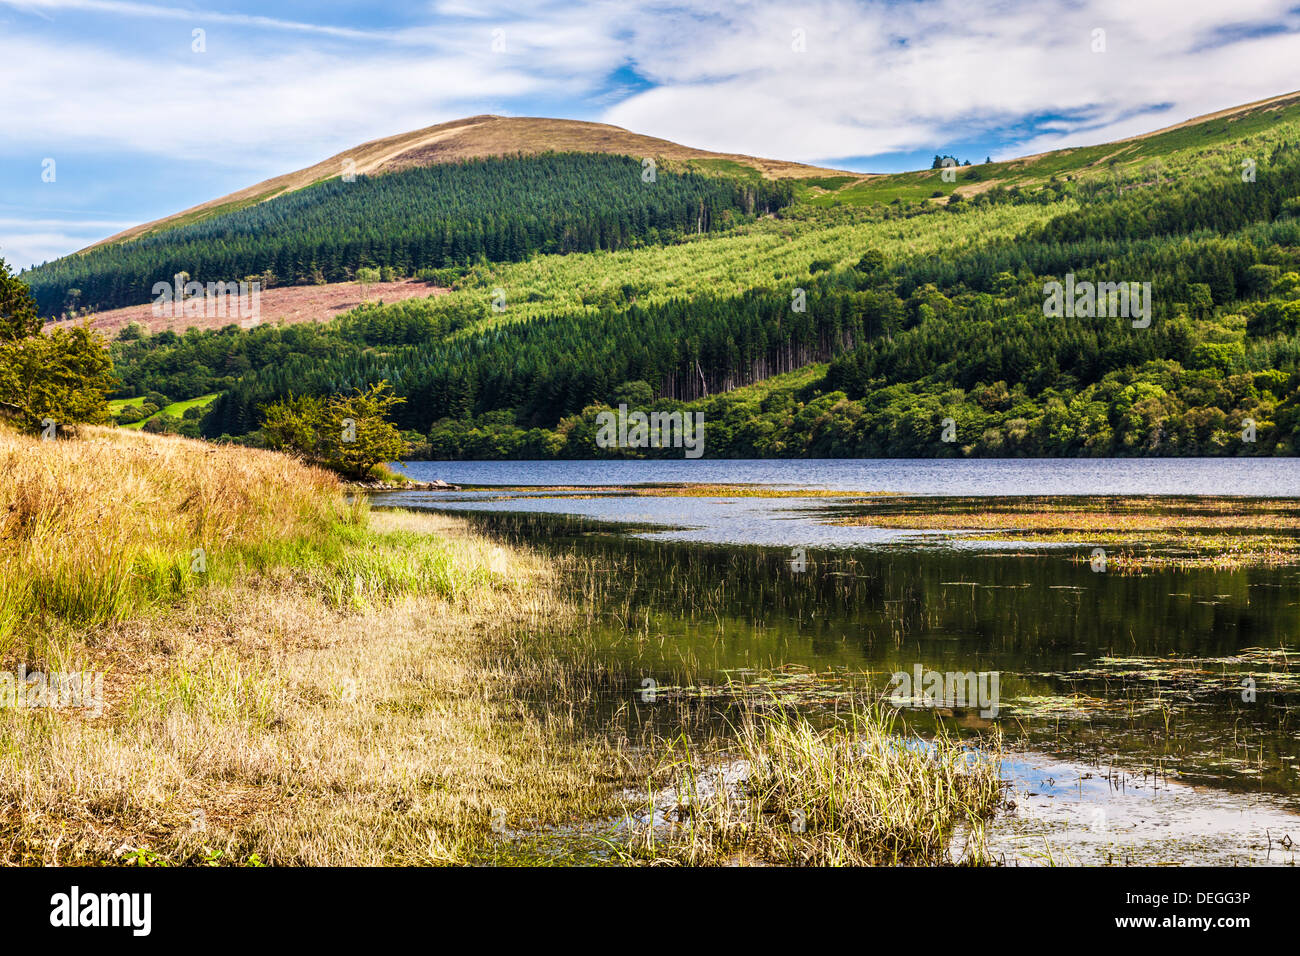 View over the Talybont Reservoir in the Brecon Beacons, Wales, UK Stock Photo